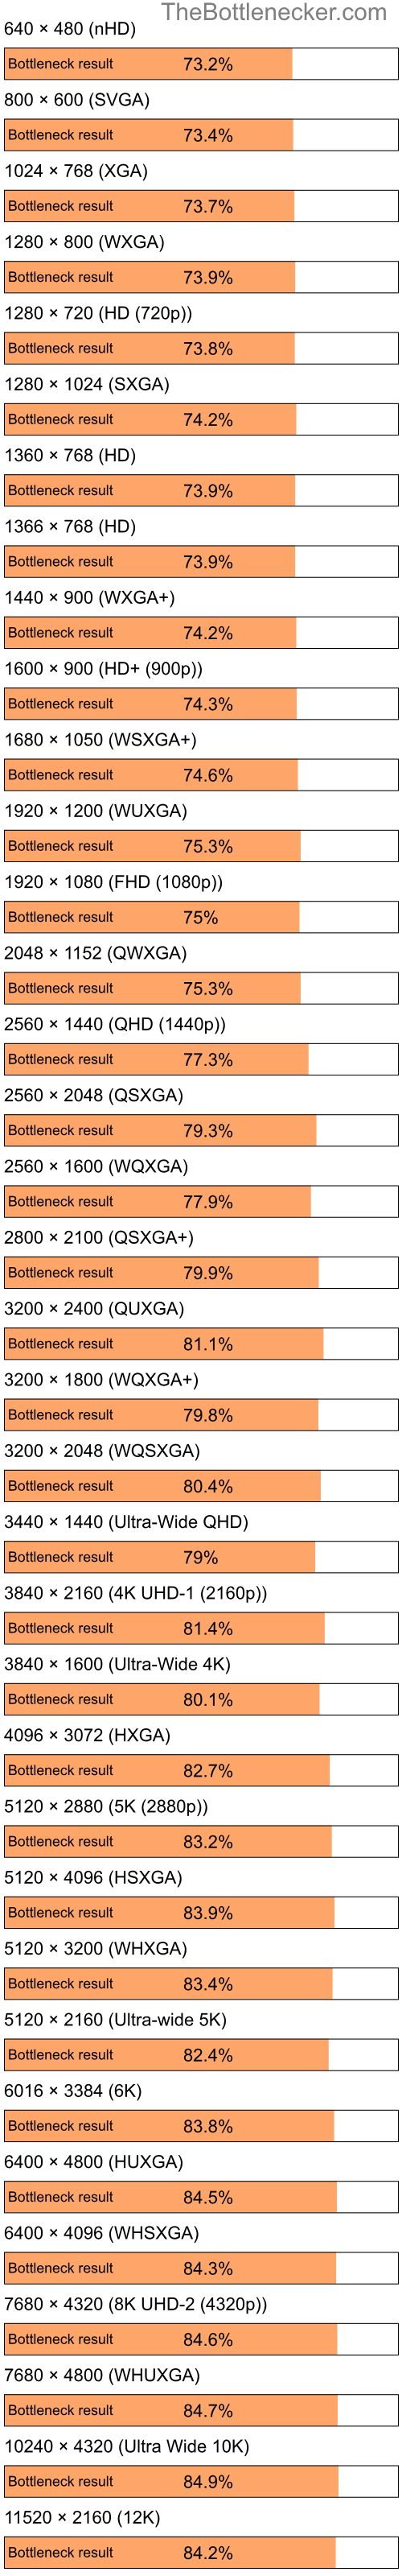 Bottleneck results by resolution for Intel Atom Z520 and AMD Radeon 3100 in Graphic Card Intense Tasks